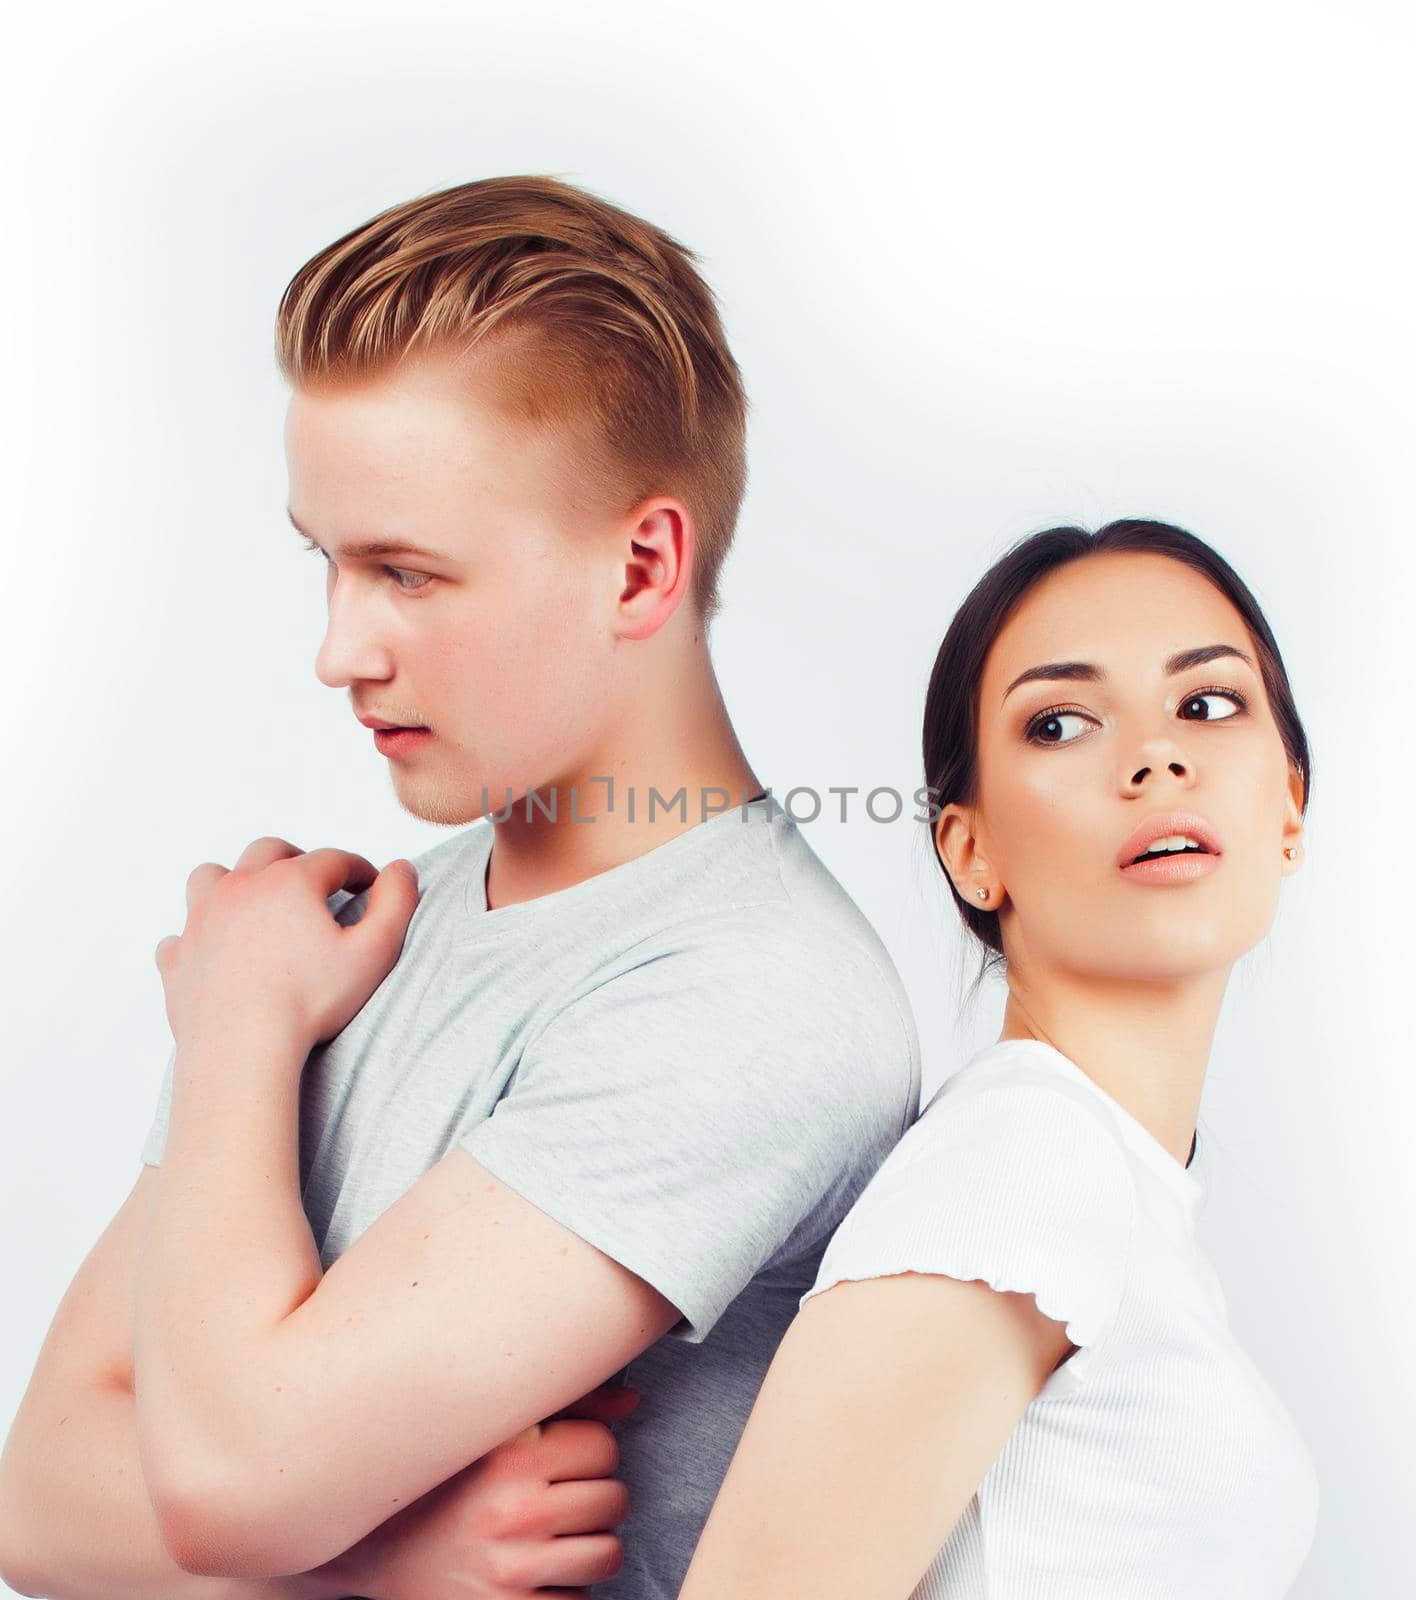 modern hipster guys together couple diverse nations, asian girl and caucasian blond boy isolated on white background, lifestyle people concept by JordanJ